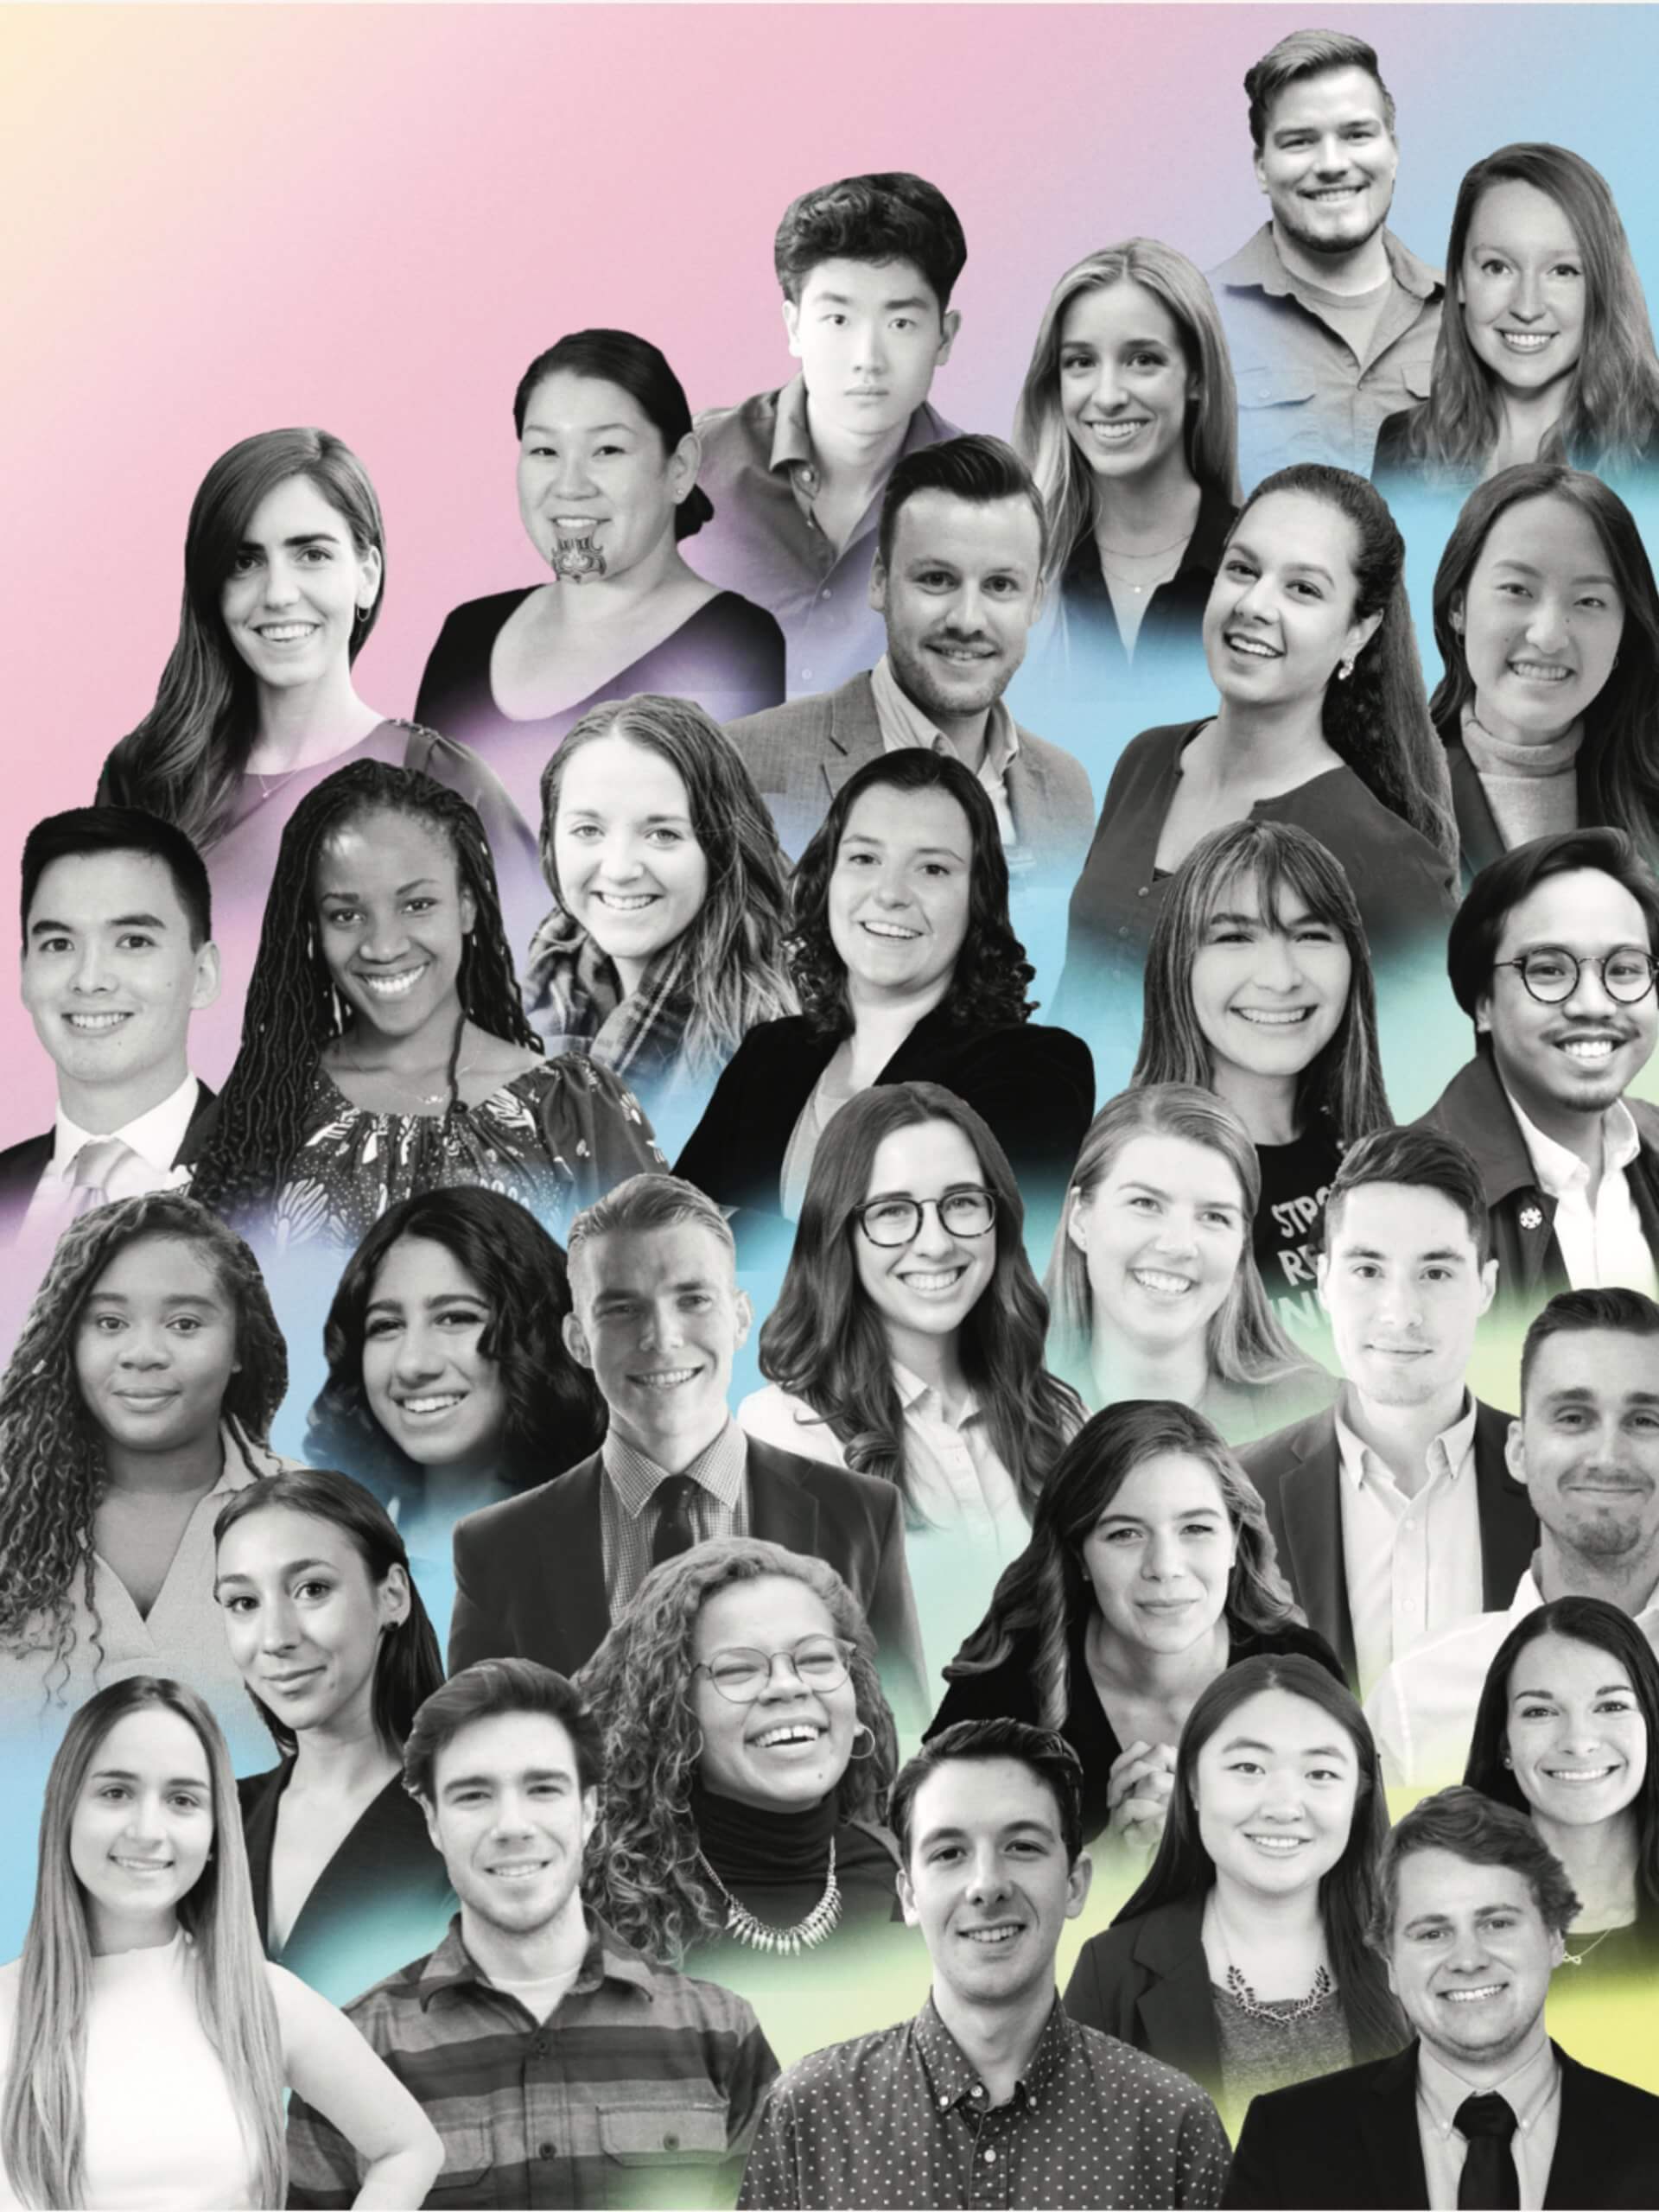 30 under 30: Canada’s Top Sustainability Leaders